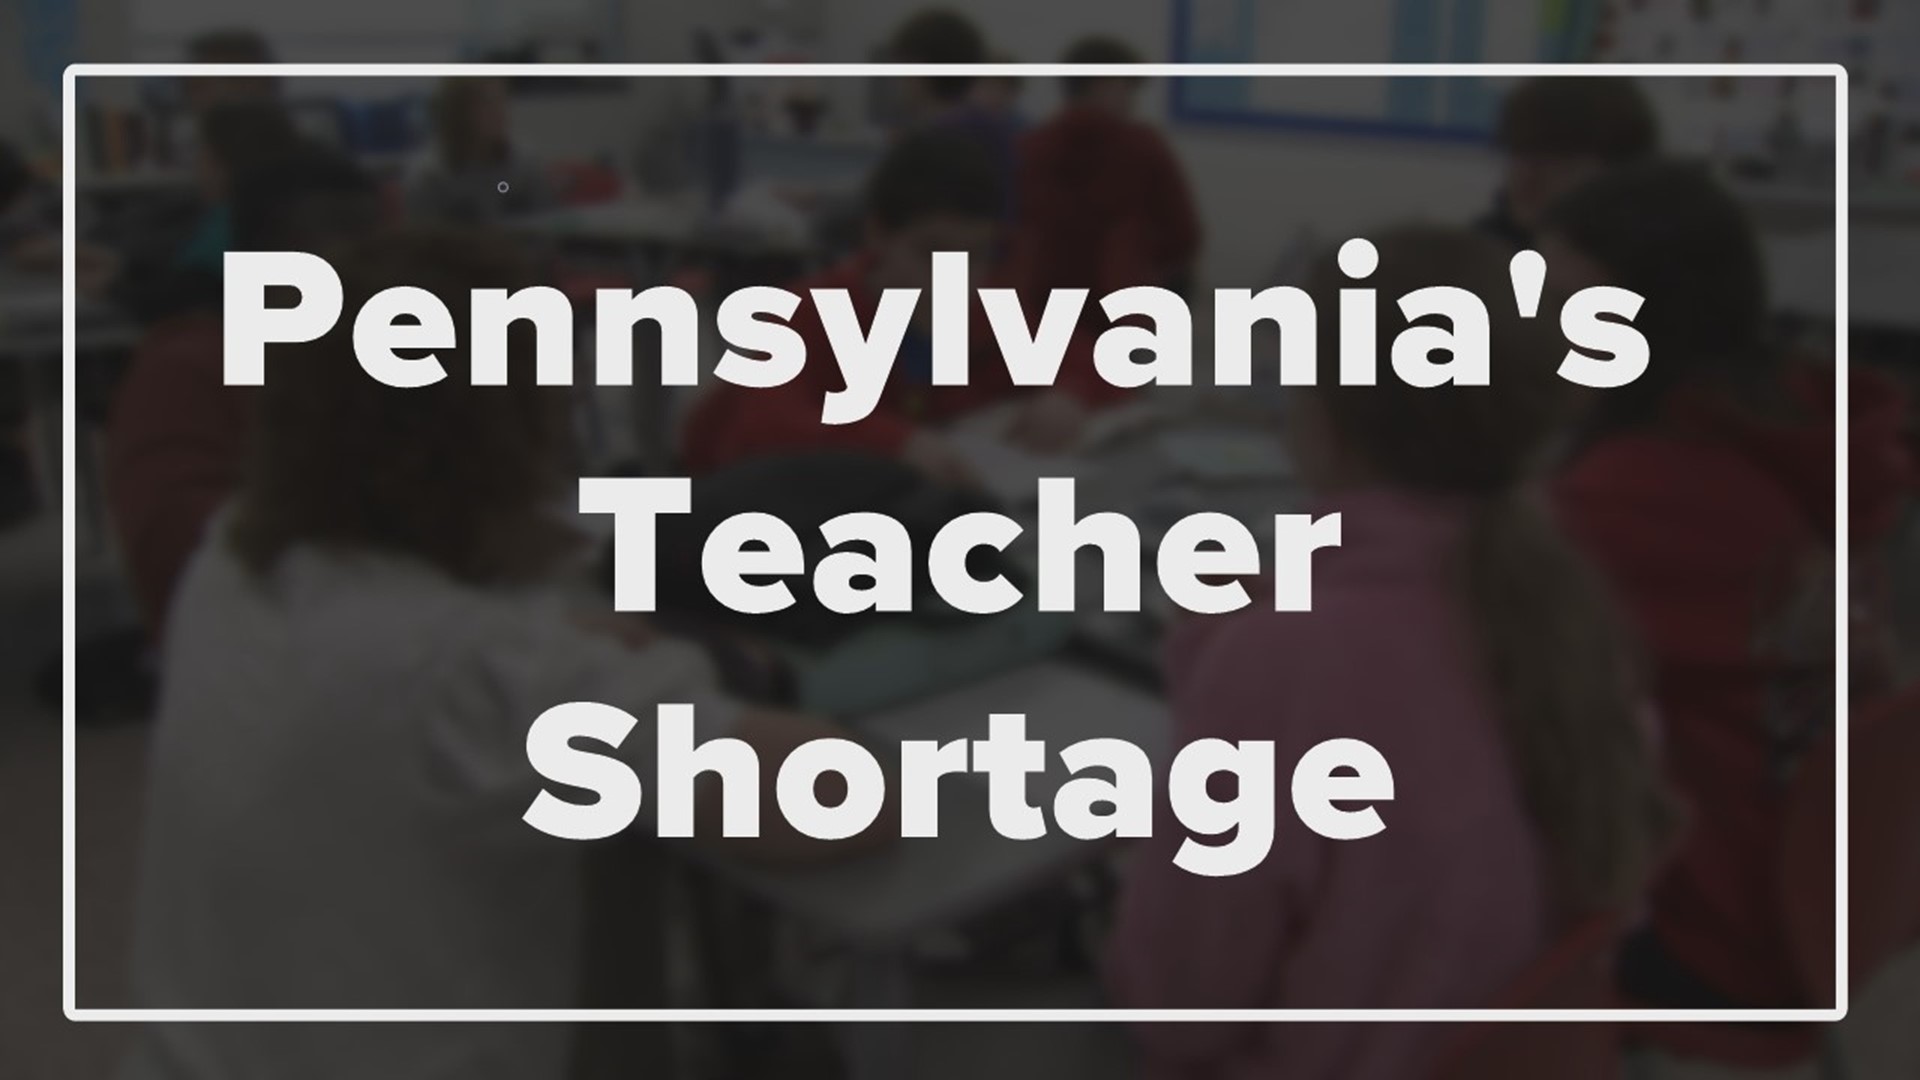 It's a well-documented problem that lawmakers are trying to address. The state doesn't have enough teachers, and school districts are having trouble staffing.